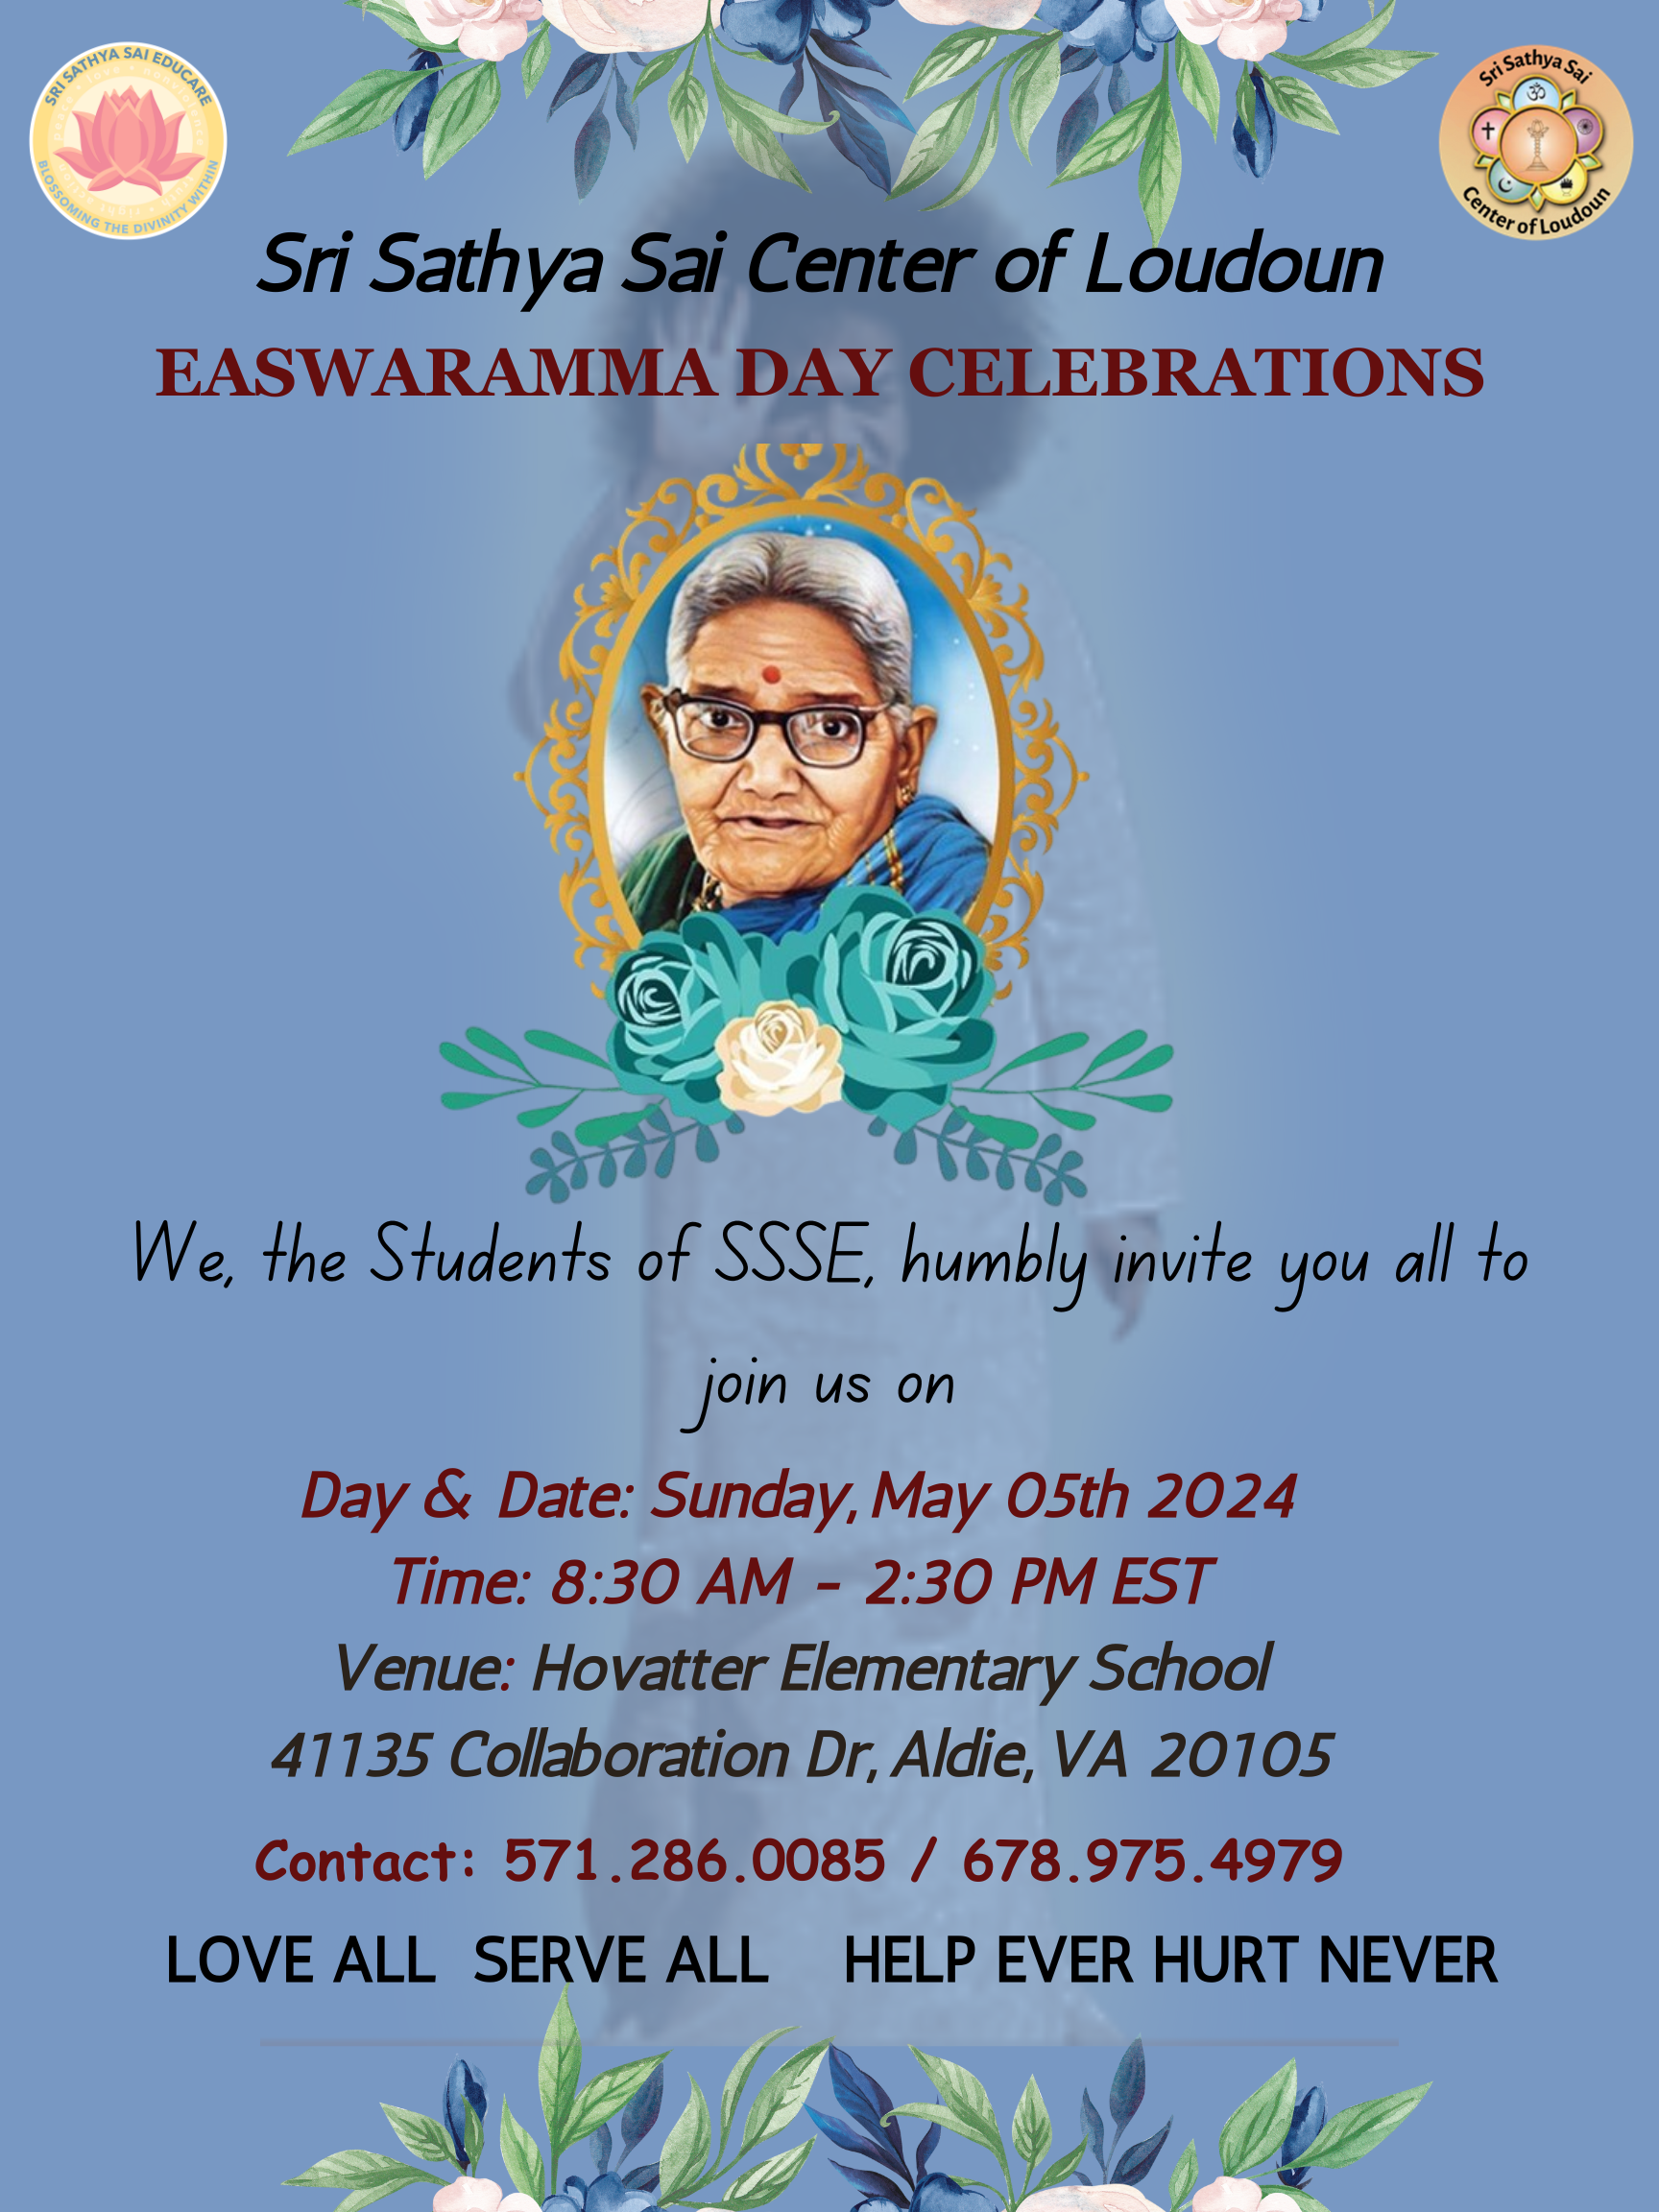 SSSCL - Easwaramma day 2024.png